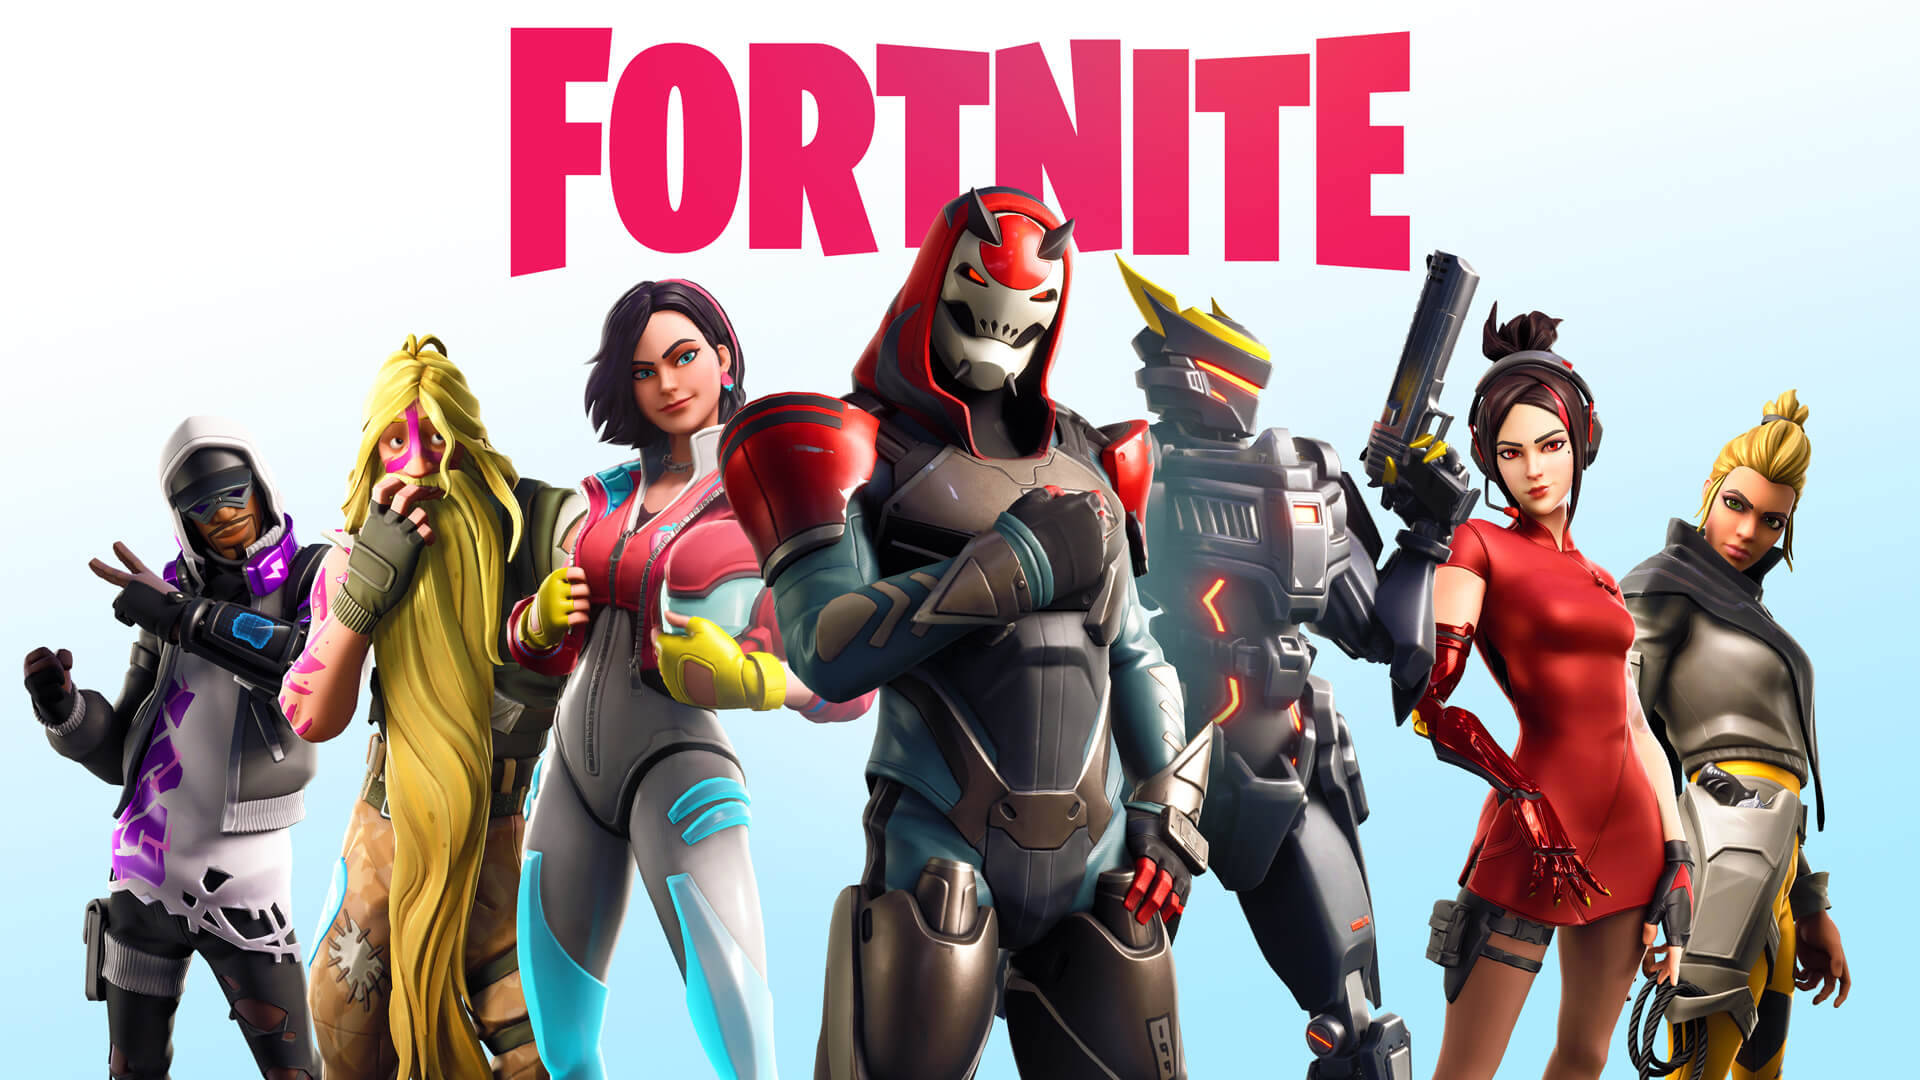 Explore the Battle Royale World of Fortnite in HD Wallpaper